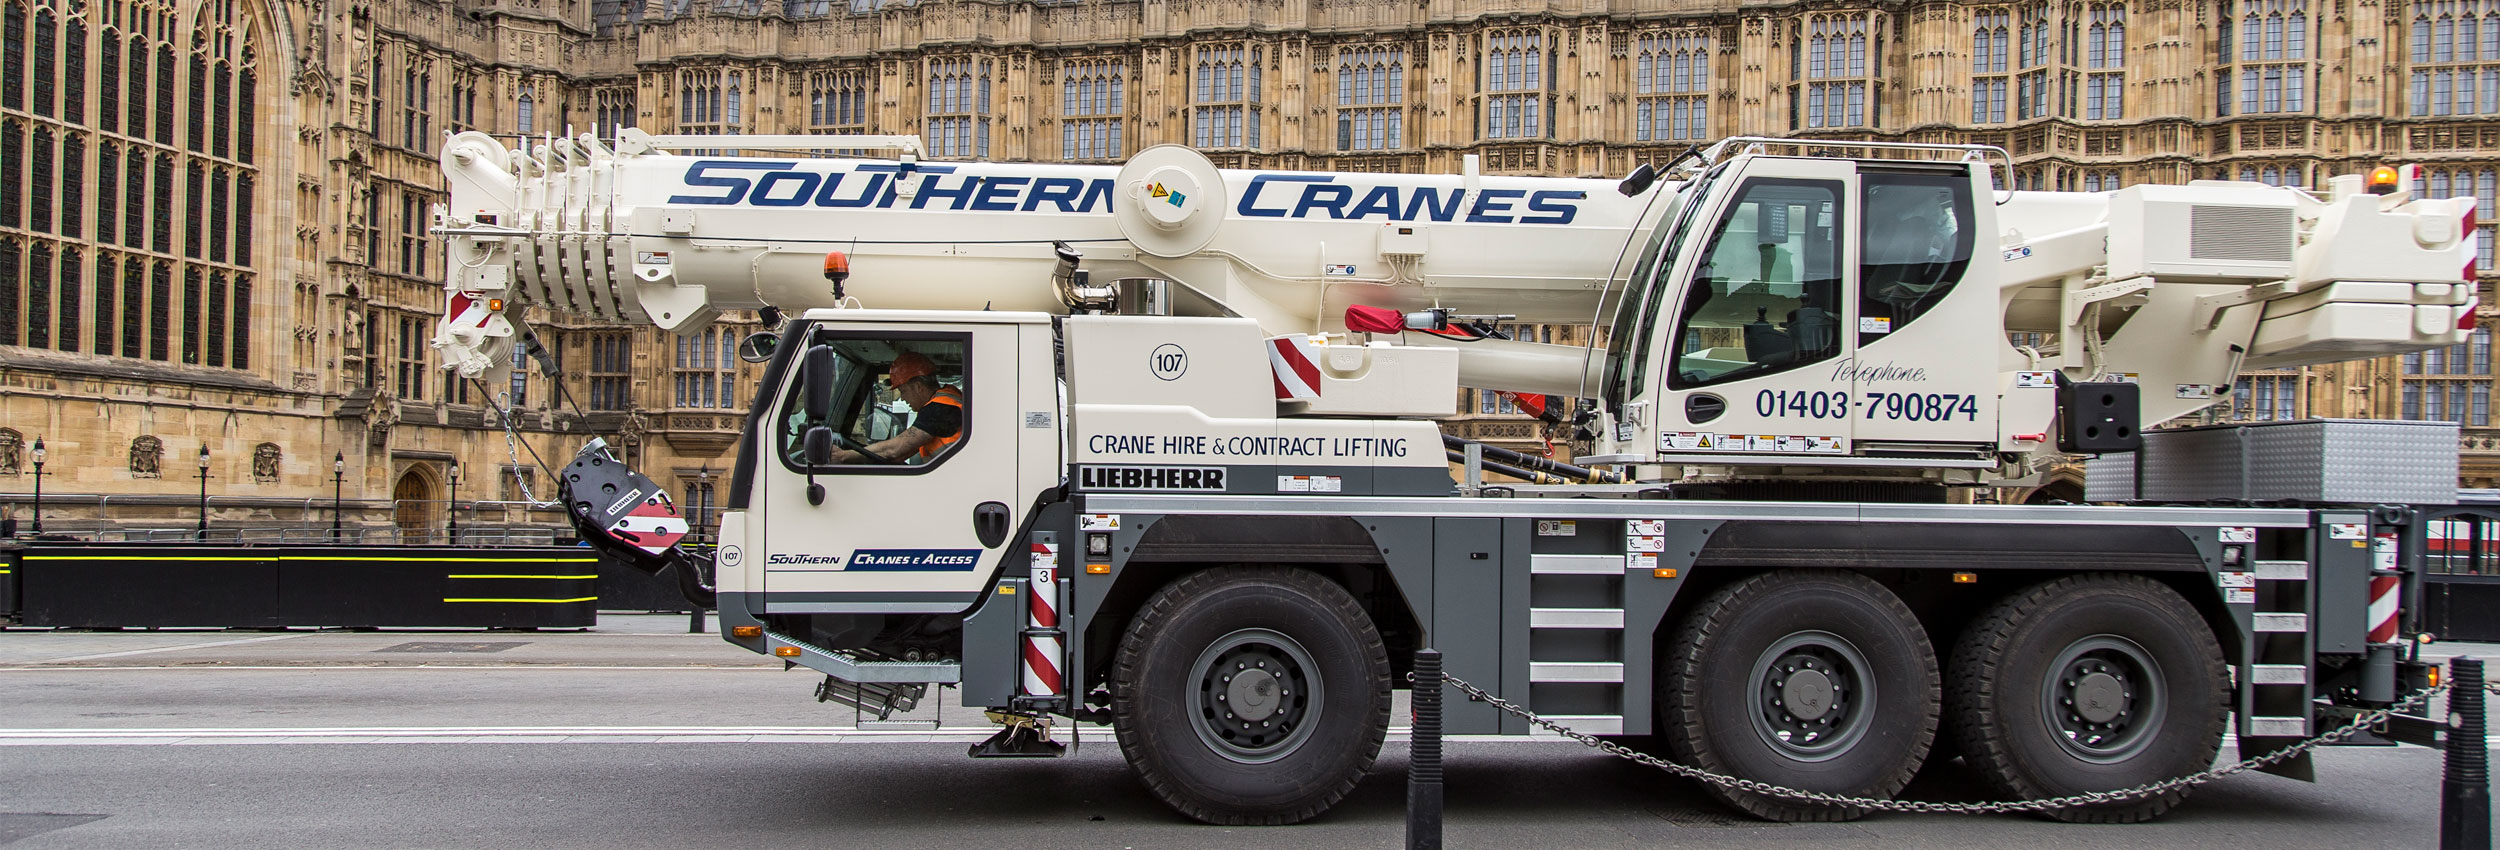 Mobile cranes up to 80 tonnes - Southern Cranes & Access, Sussex, Surrey, London, South East England